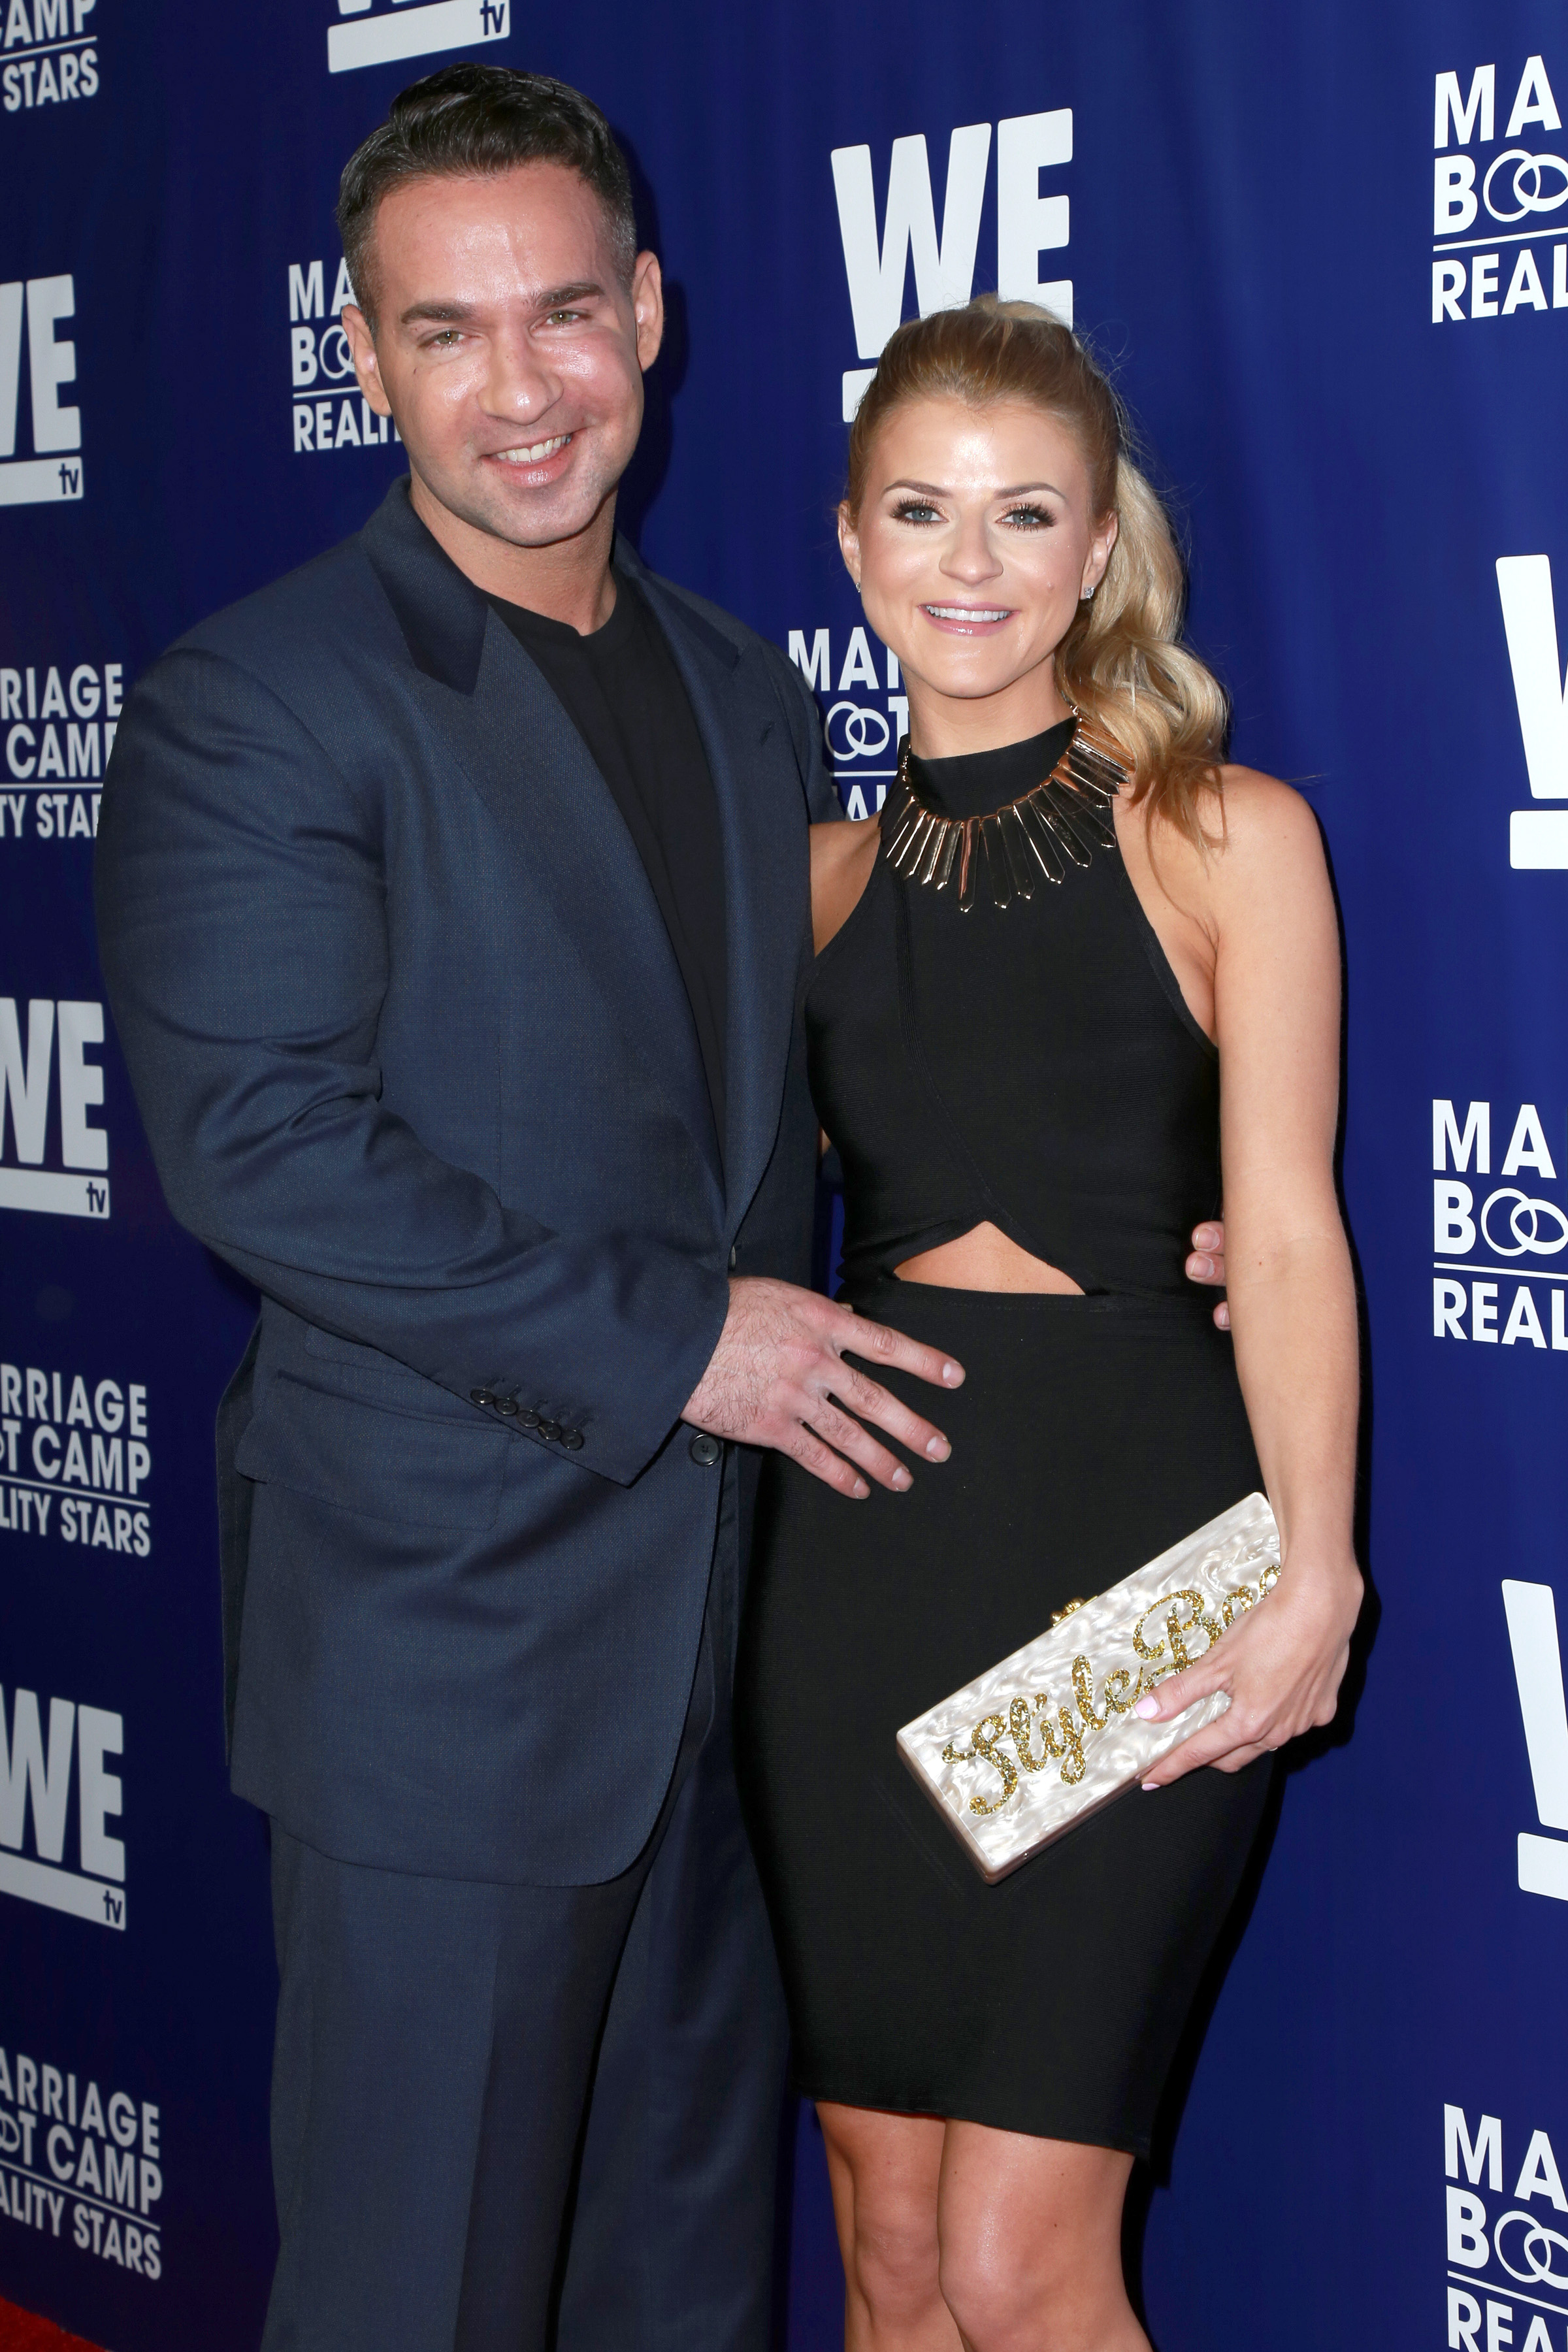 Jersey Shores Mike Sorrentino and Lauren Pesces Relationship Timeline photo